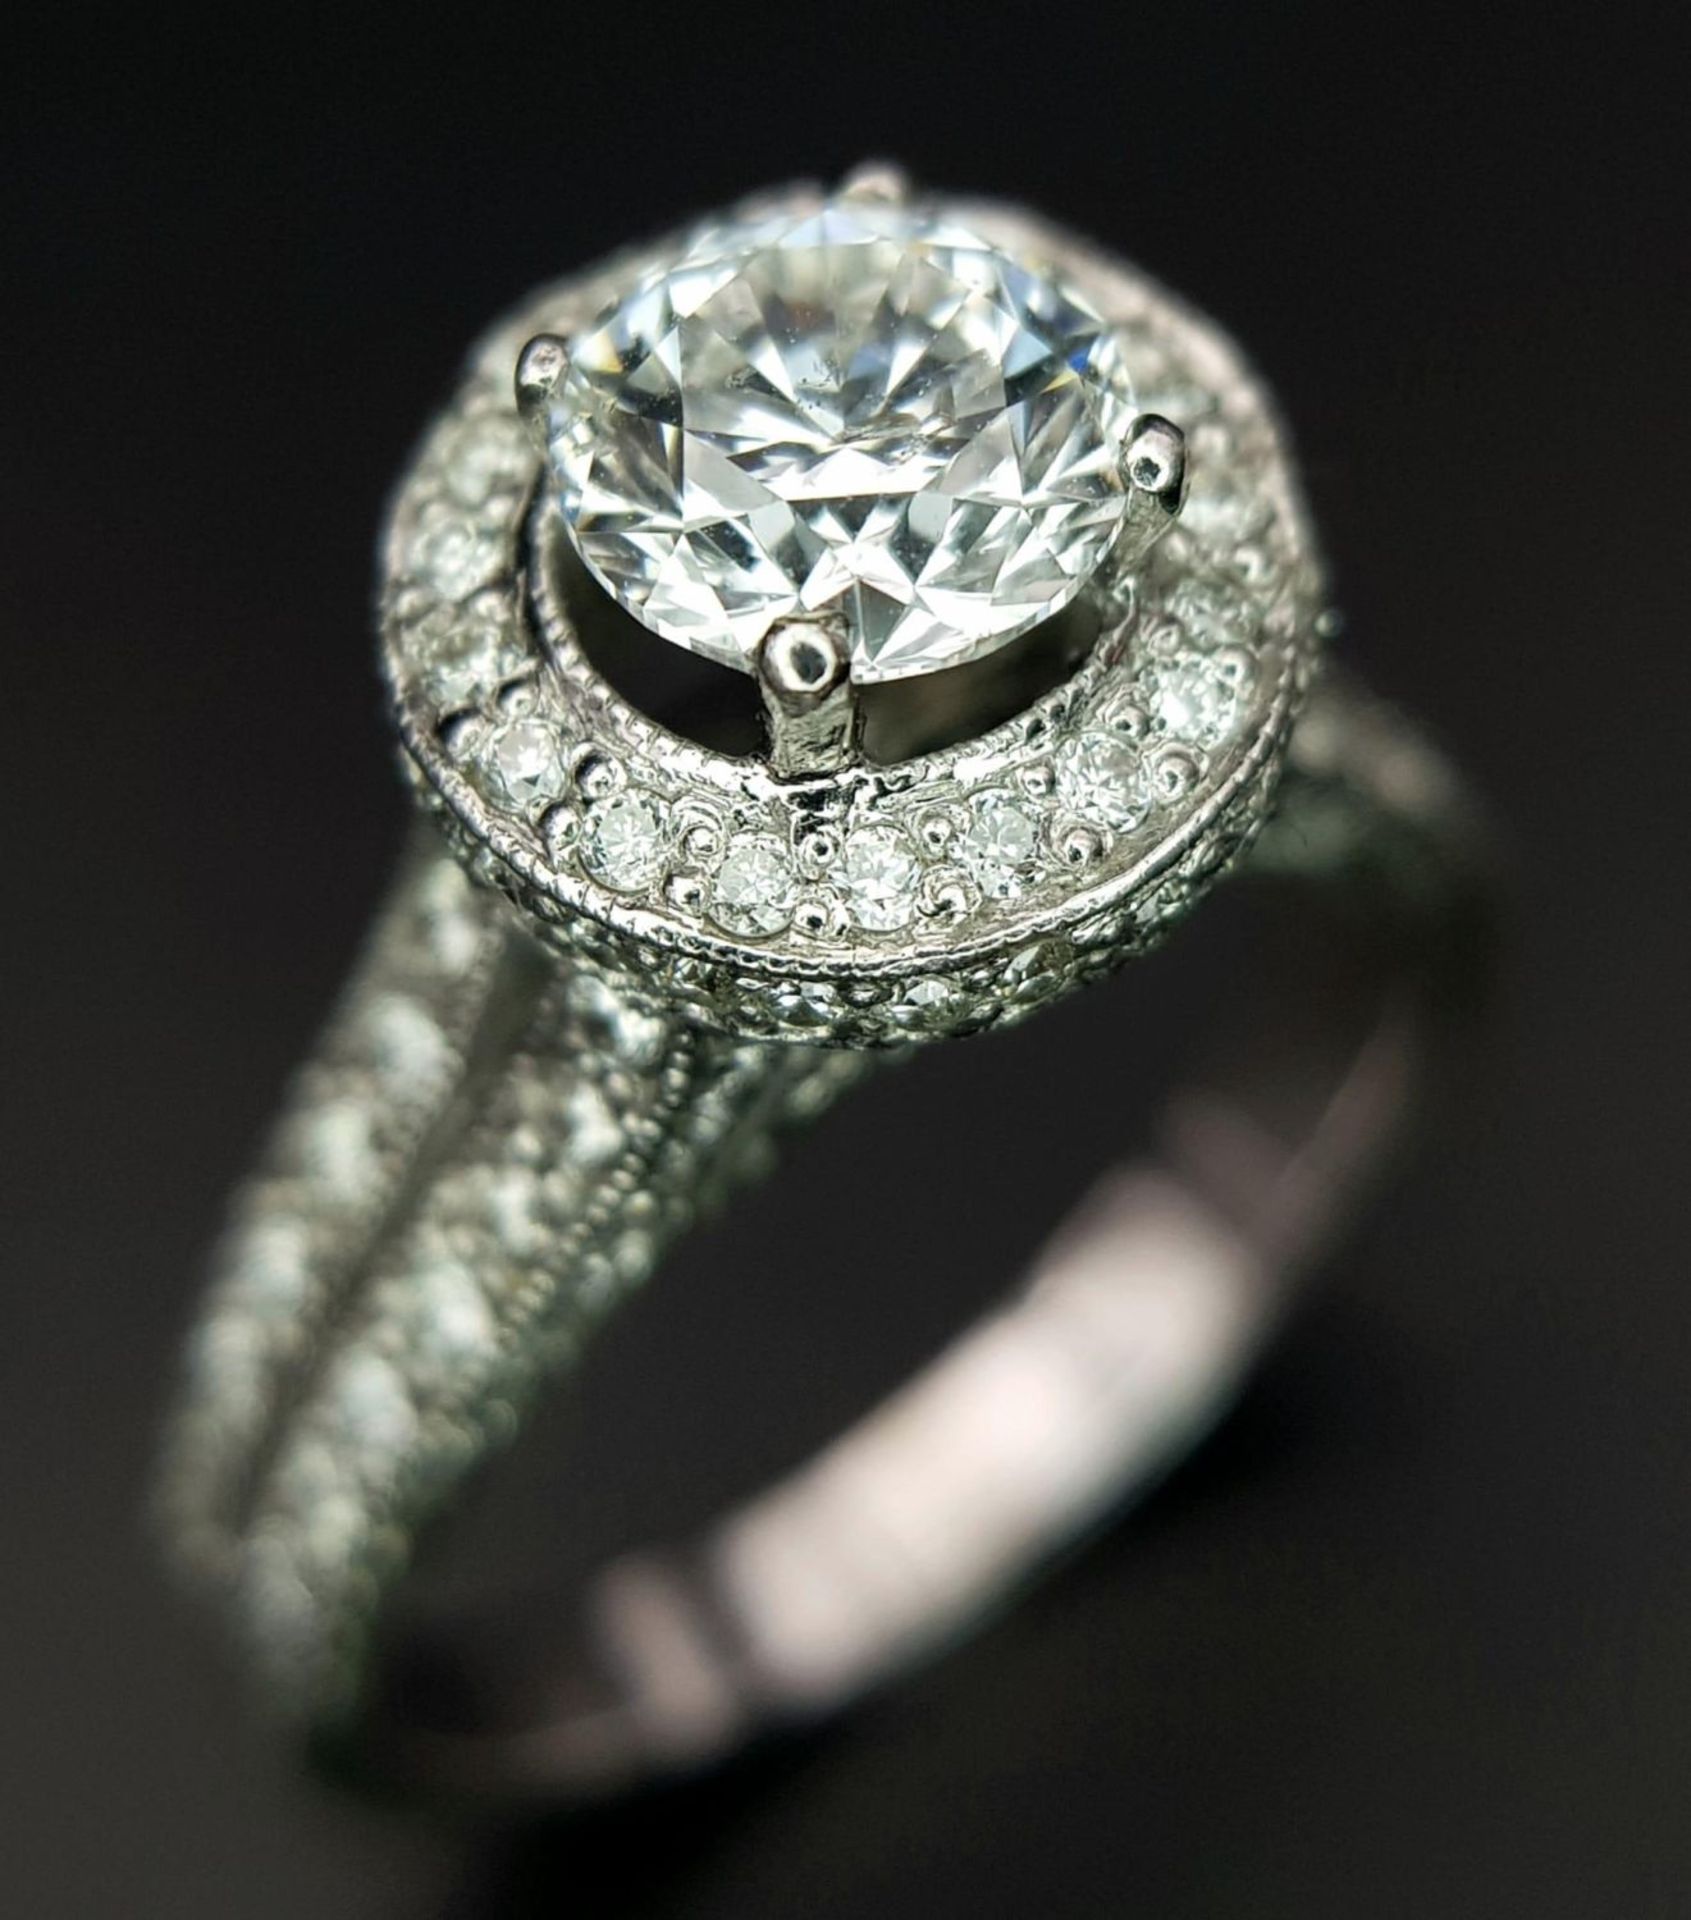 An 18 K white gold ring with a brilliant cut diamond (1.01 carats) surrounded by diamonds on the top - Bild 5 aus 22